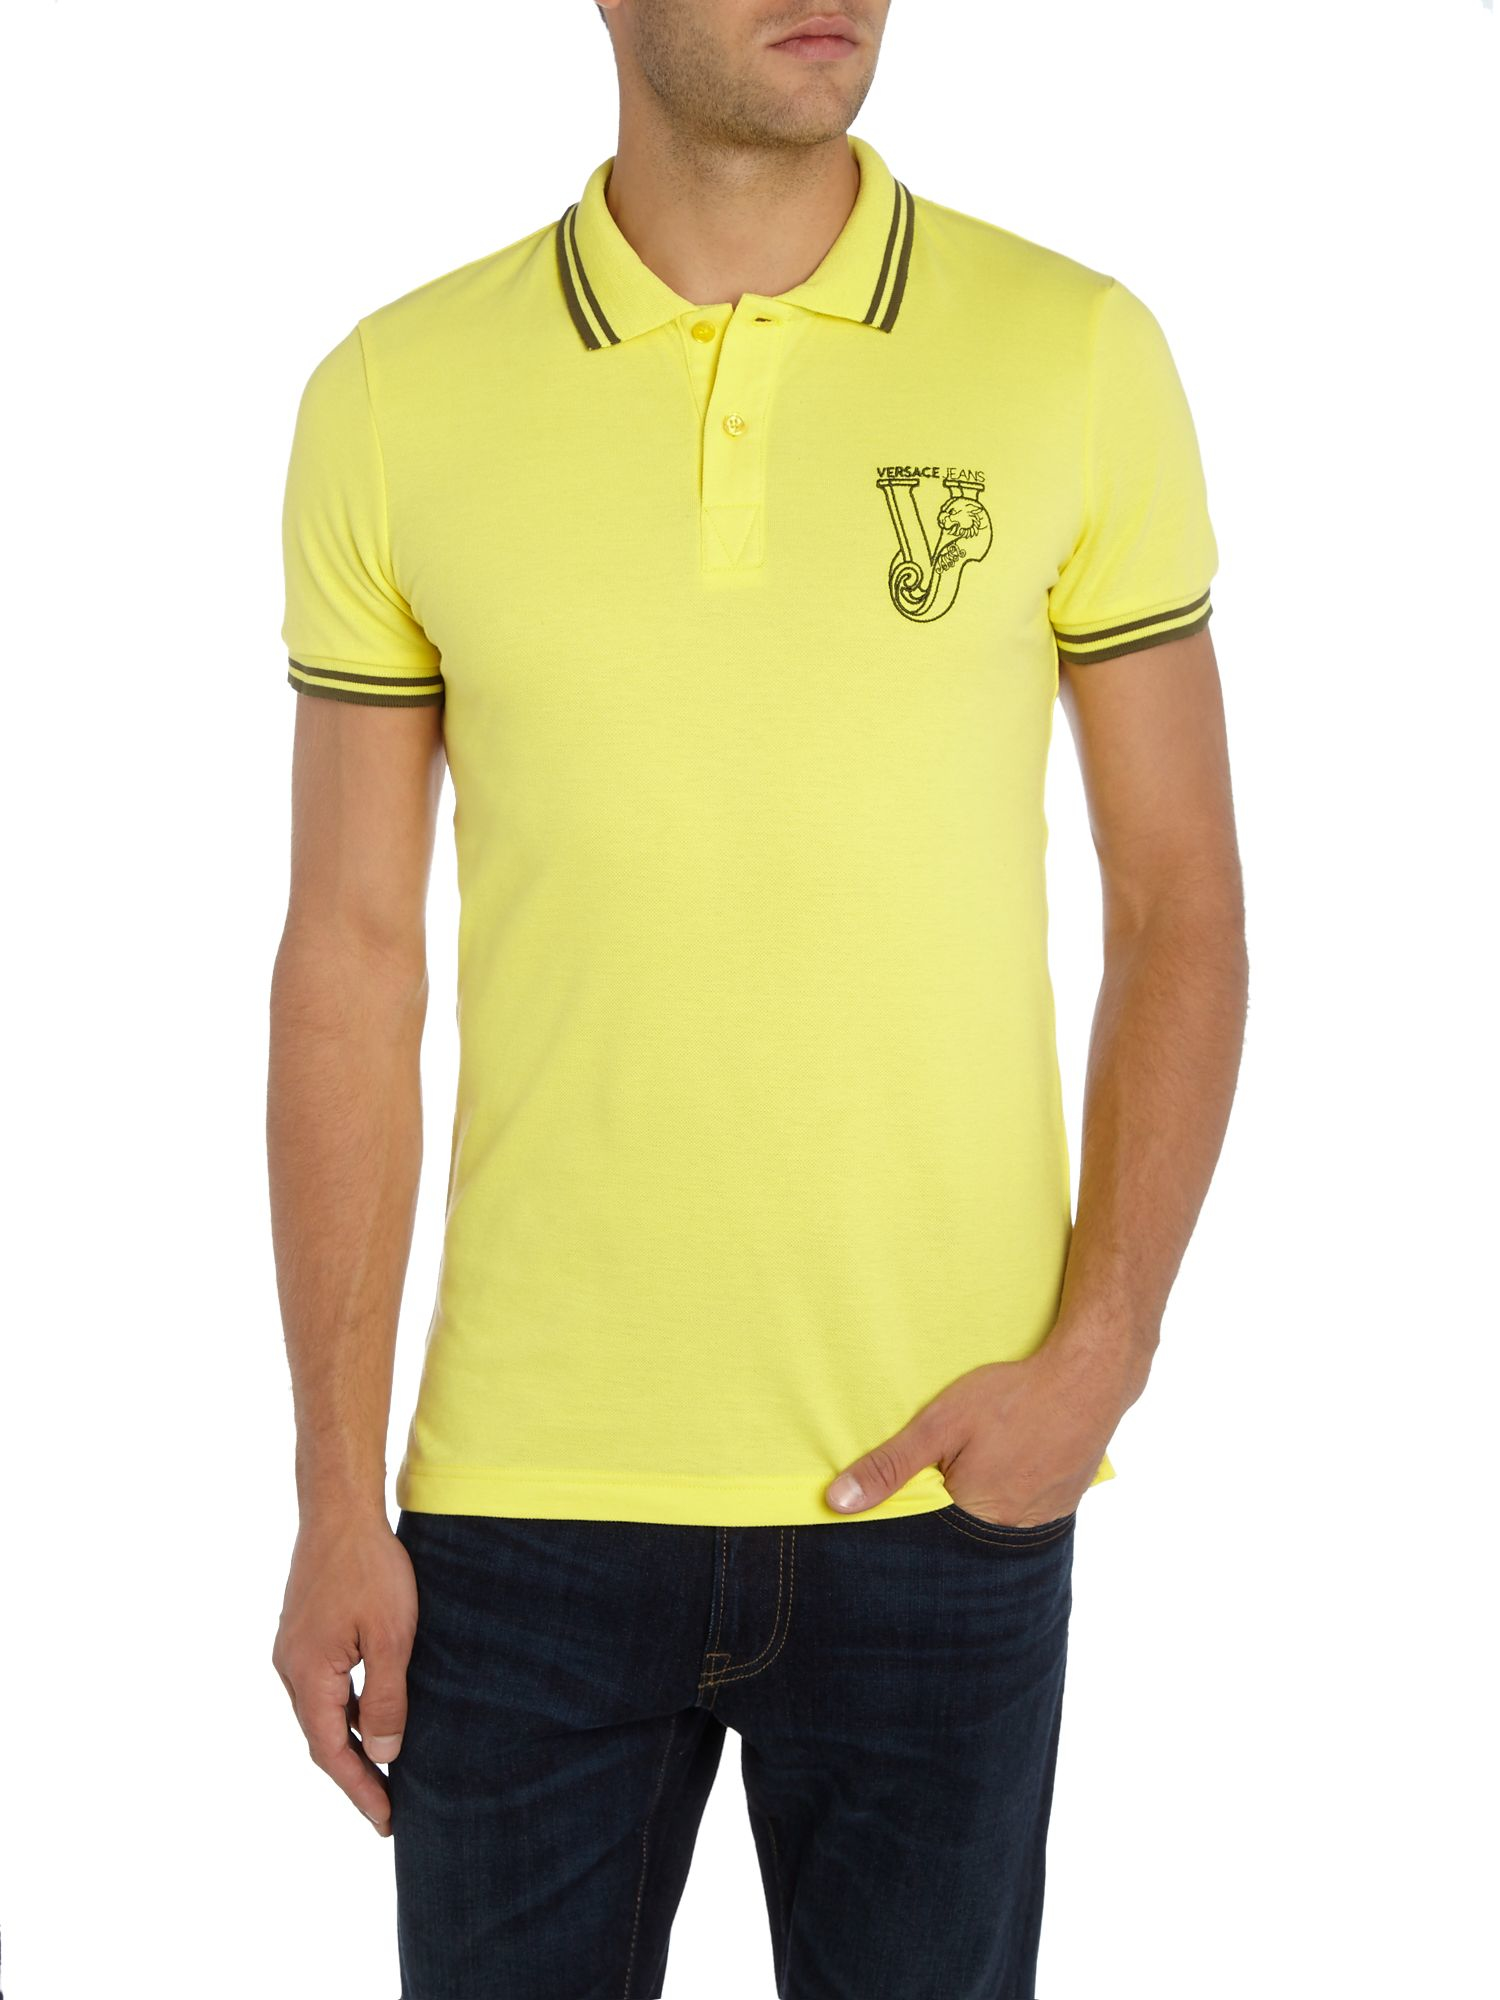 Versace Jeans Denim Chest Embroidered Logo Polo Shirt in Lemon (Yellow ...